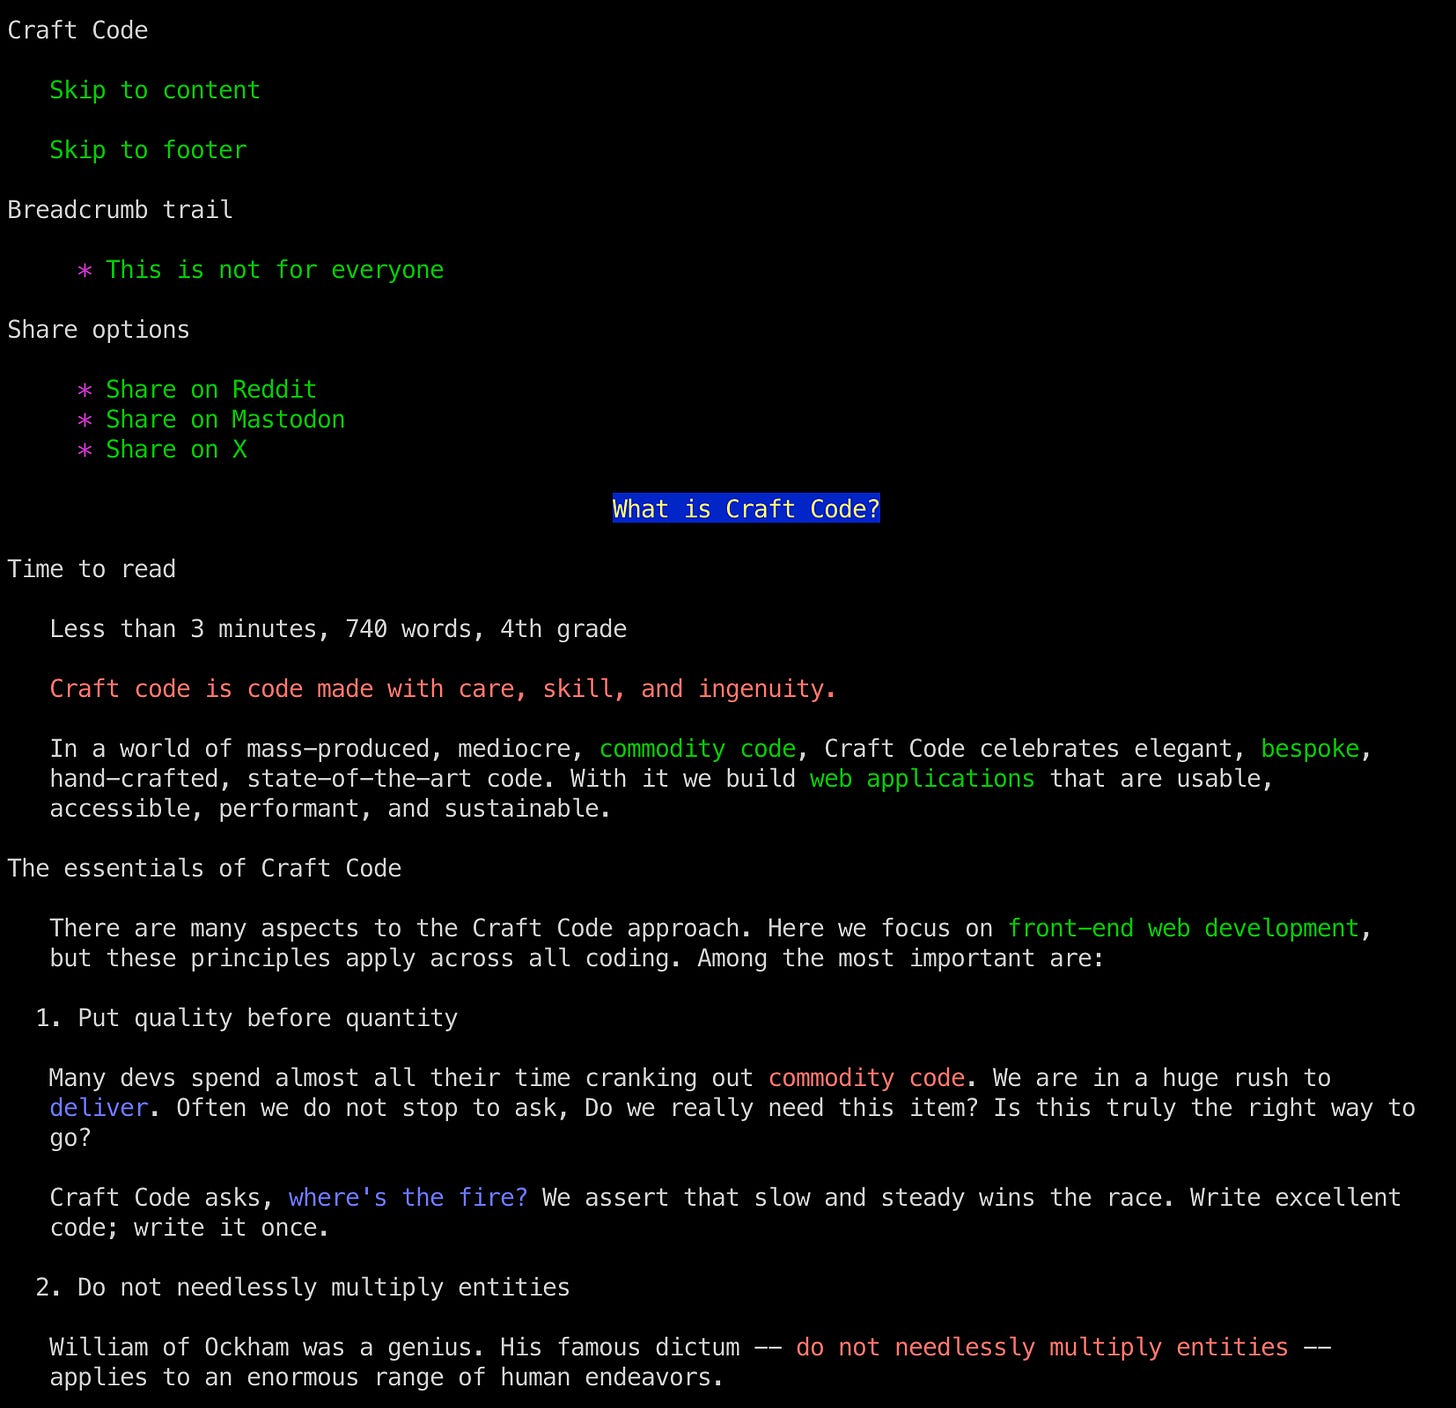 The Craft Code site works even in the Lynx text-only browser.